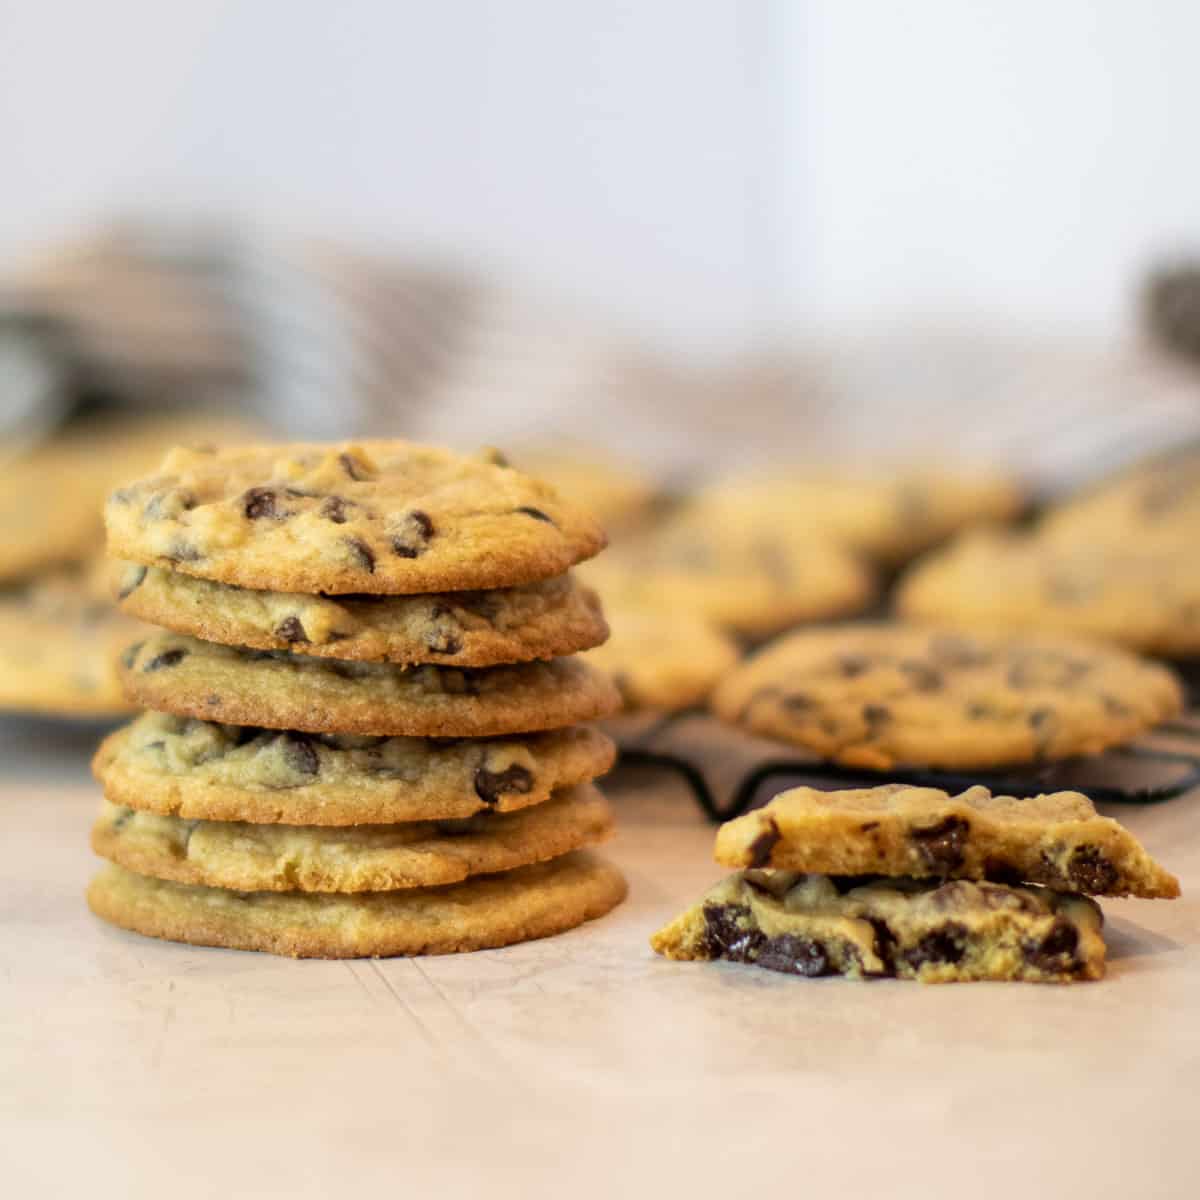 A stack of cookies with one broken in half.